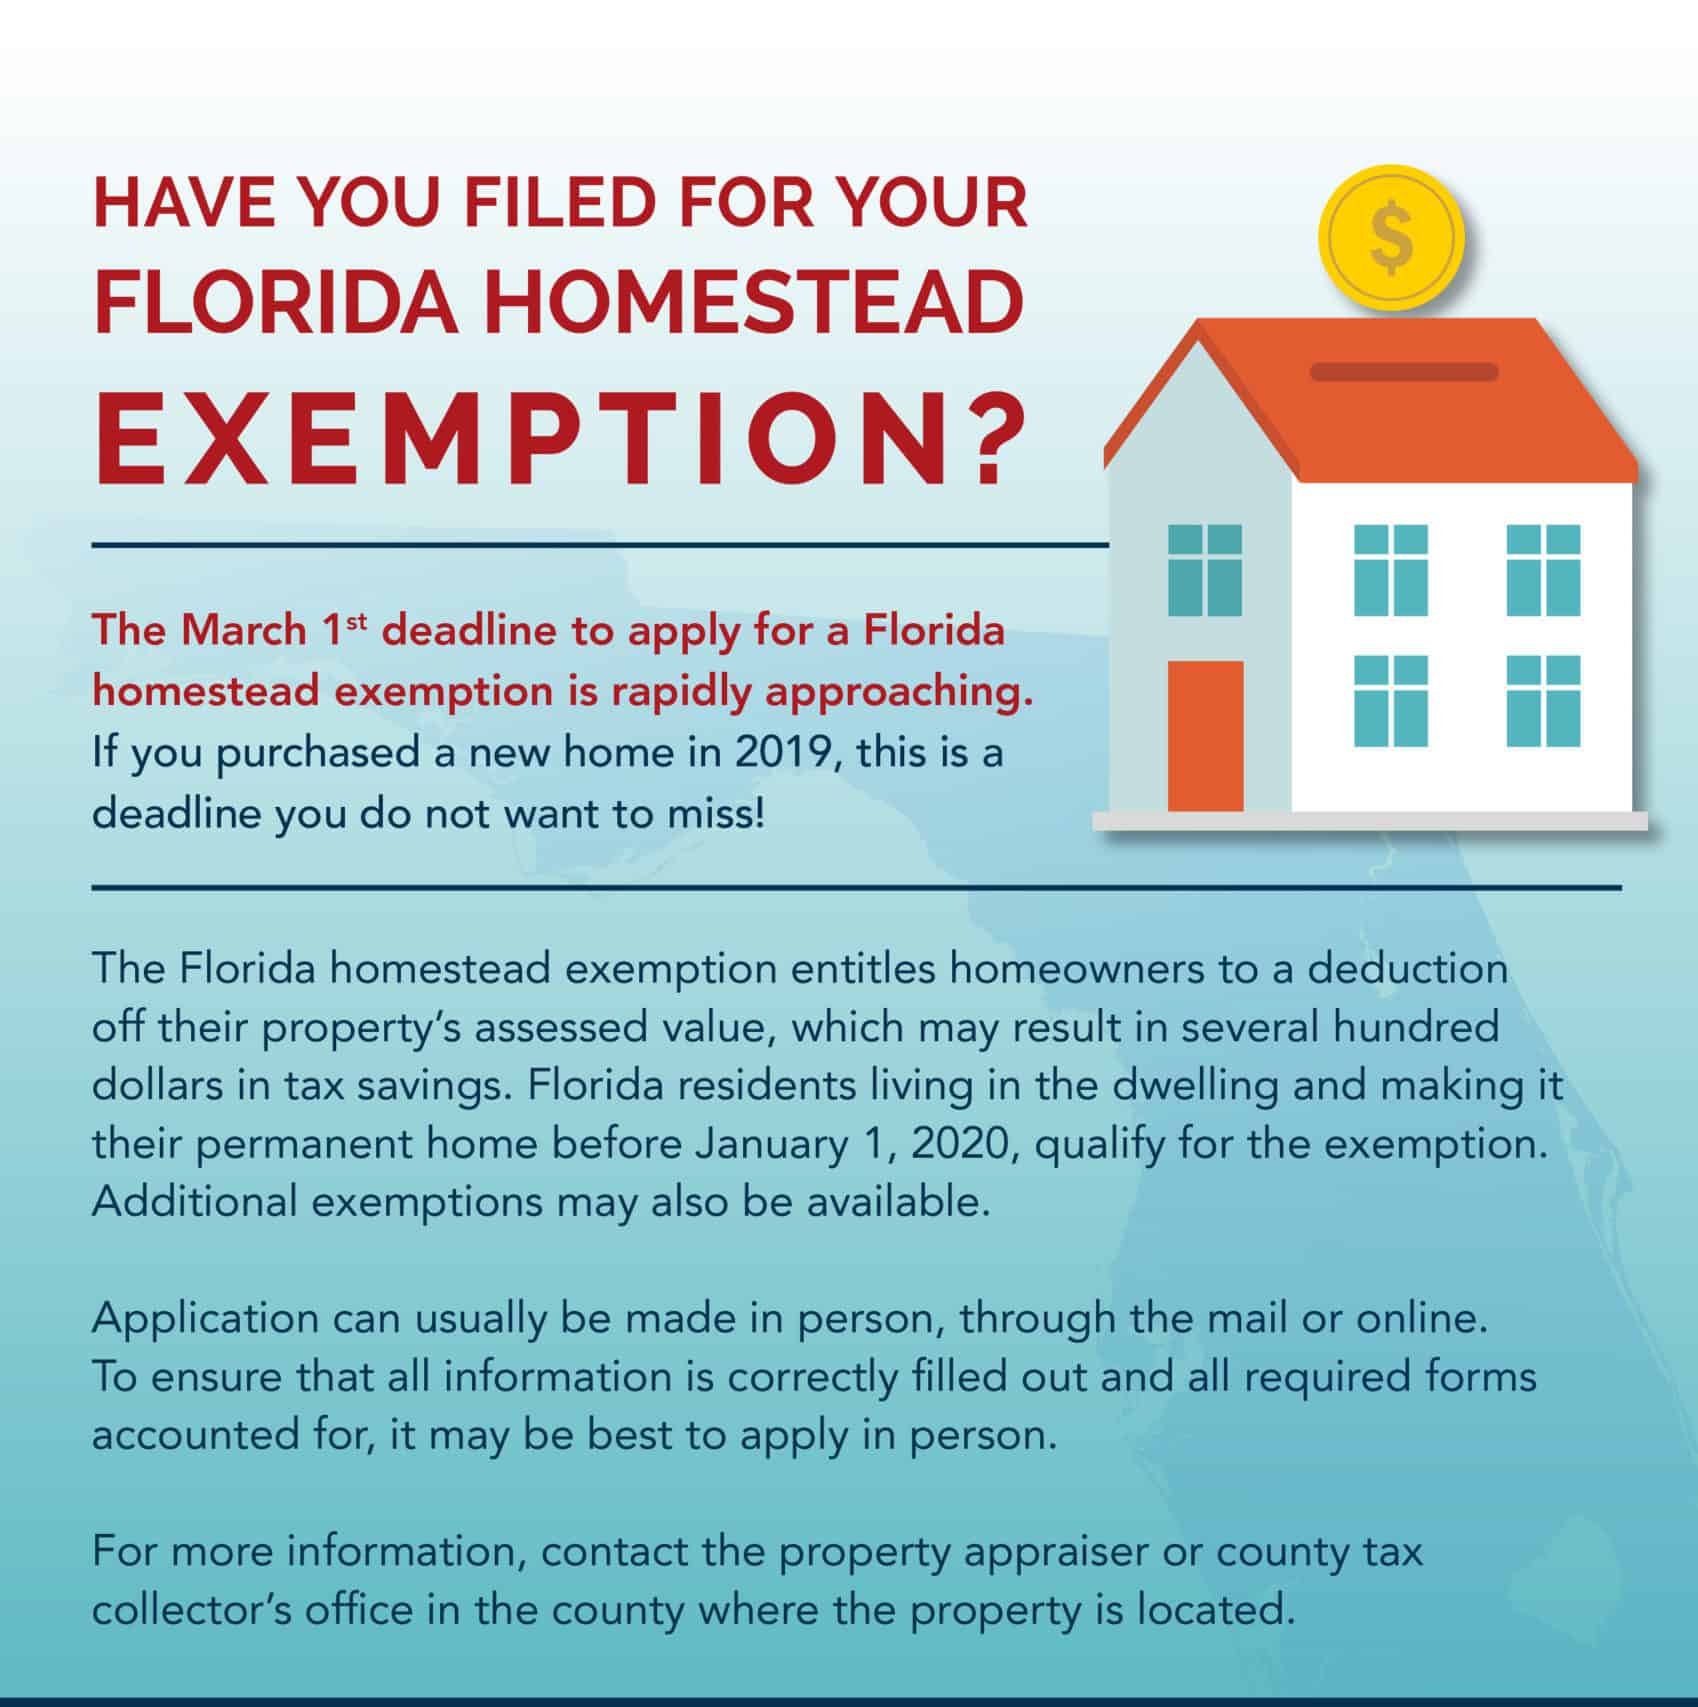 How To File For Florida Homestead Exemption Tutorial Pics